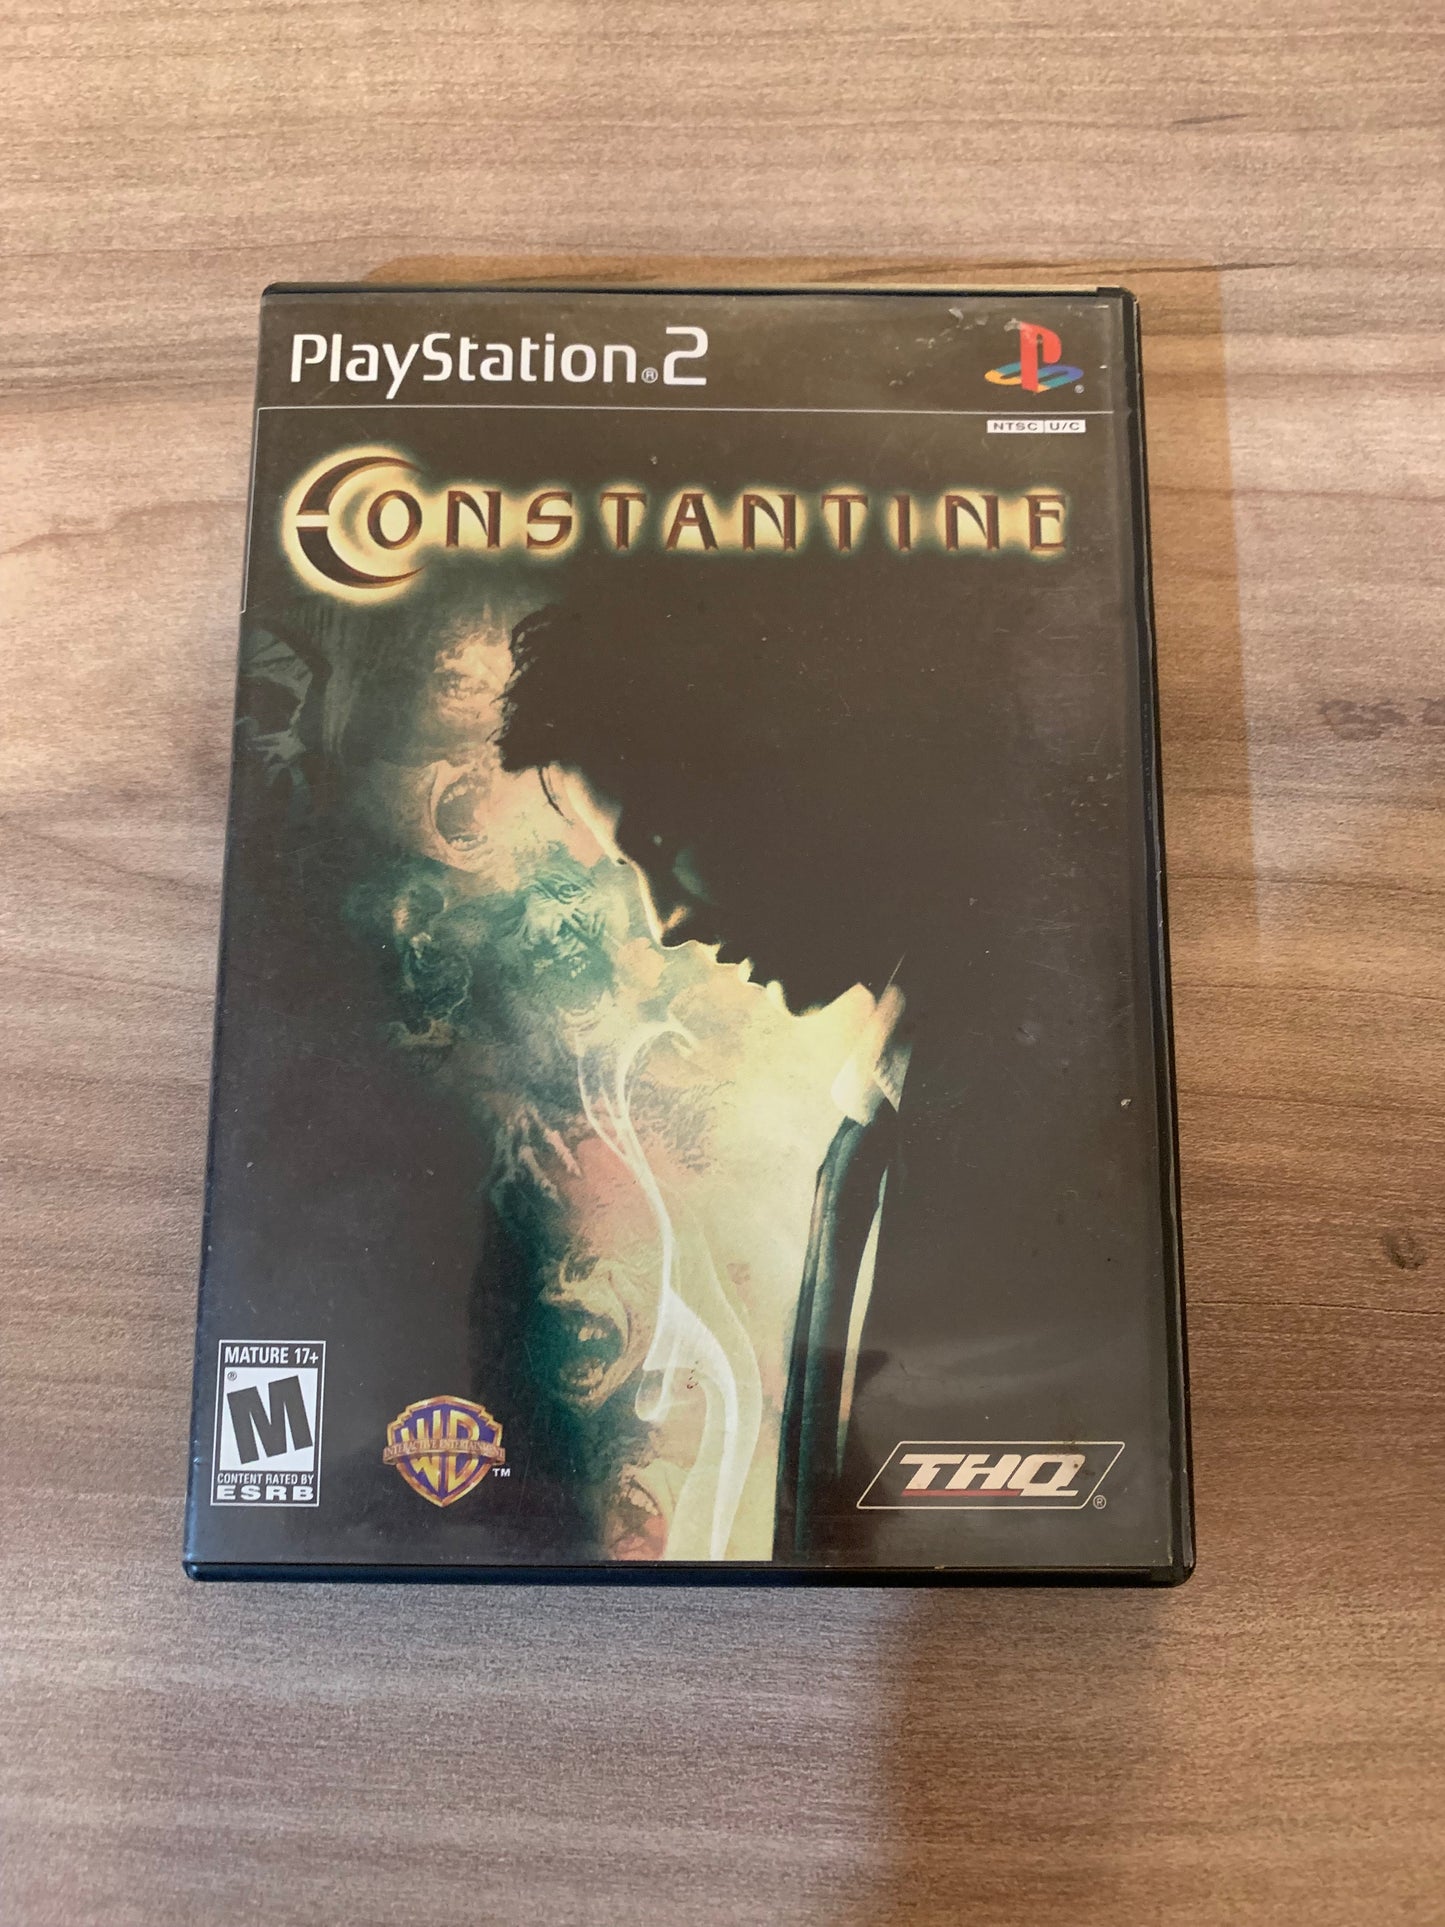 SONY PLAYSTATiON 2 [PS2] | CONSTANTiNE